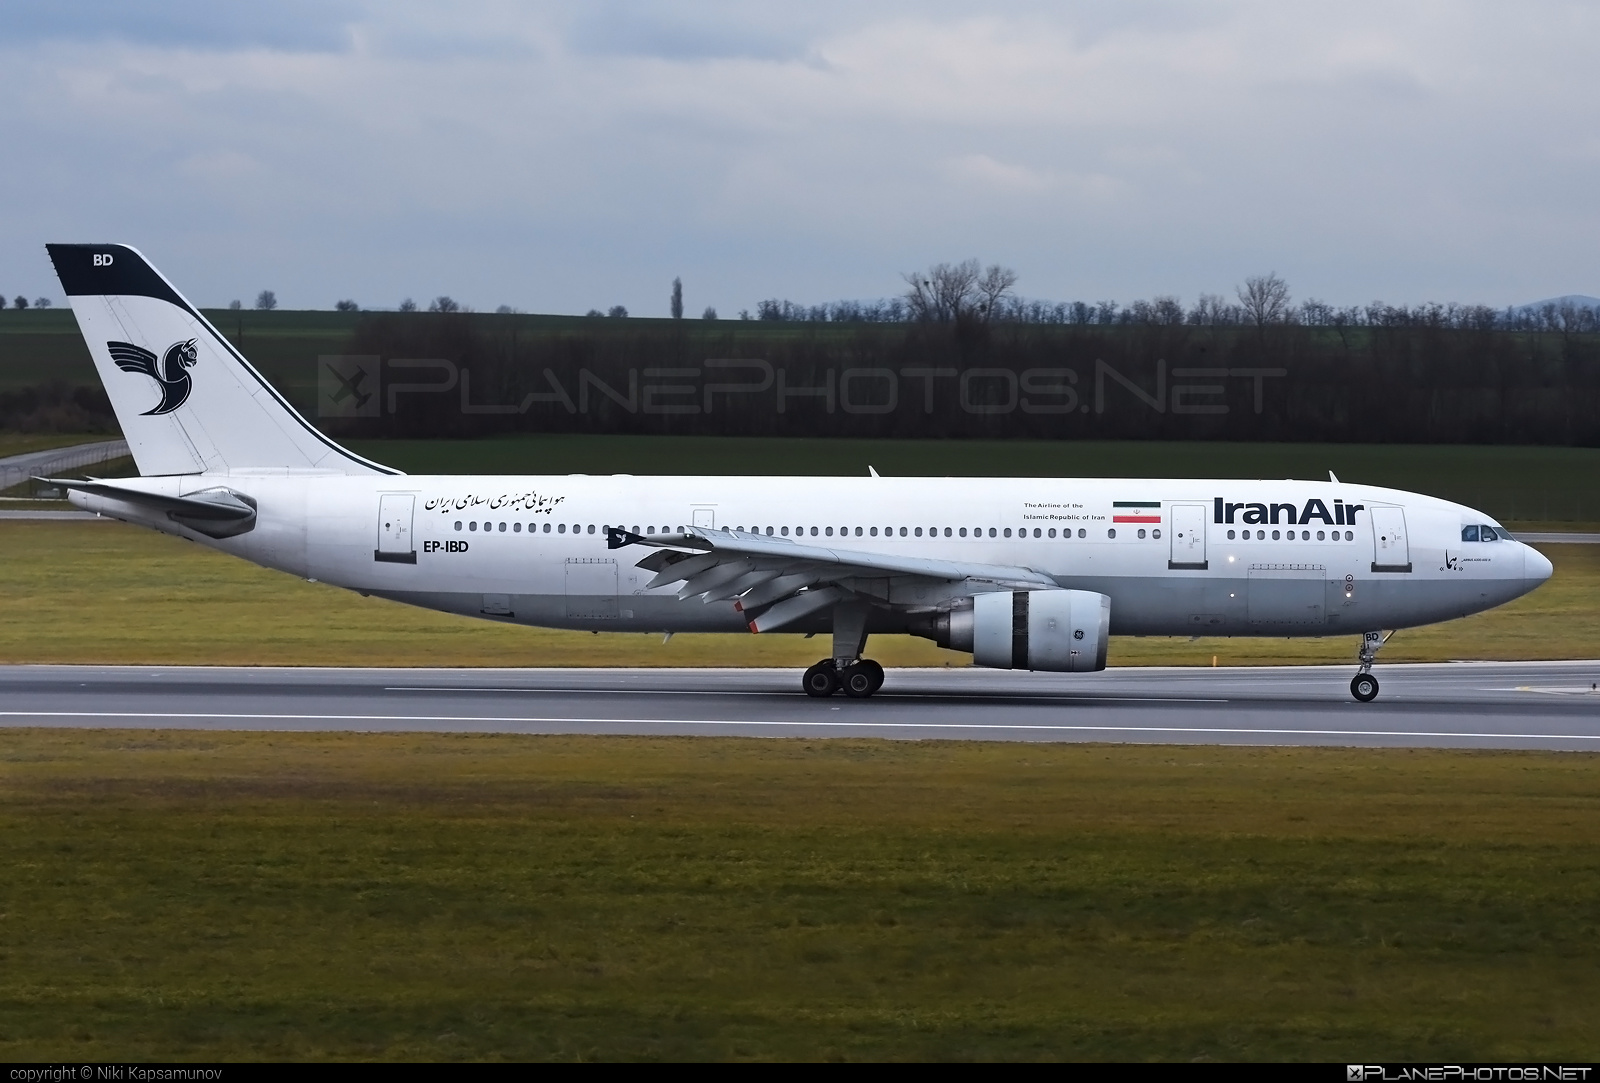 Airbus A300B4-605R - EP-IBD operated by Iran Air #a300 #airbus